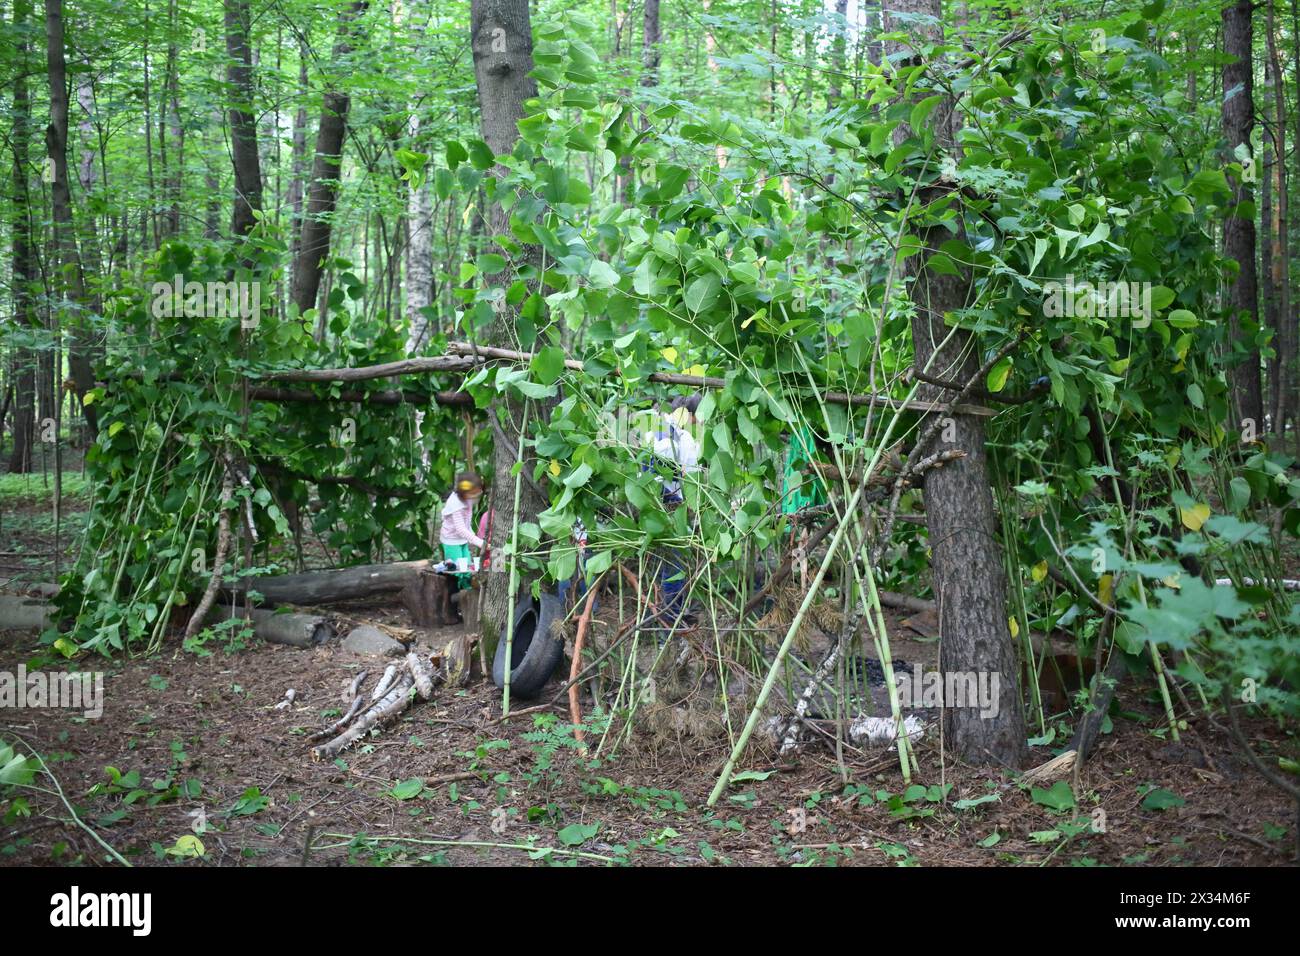 Shelter of branches for a picnic in the forest Stock Photo